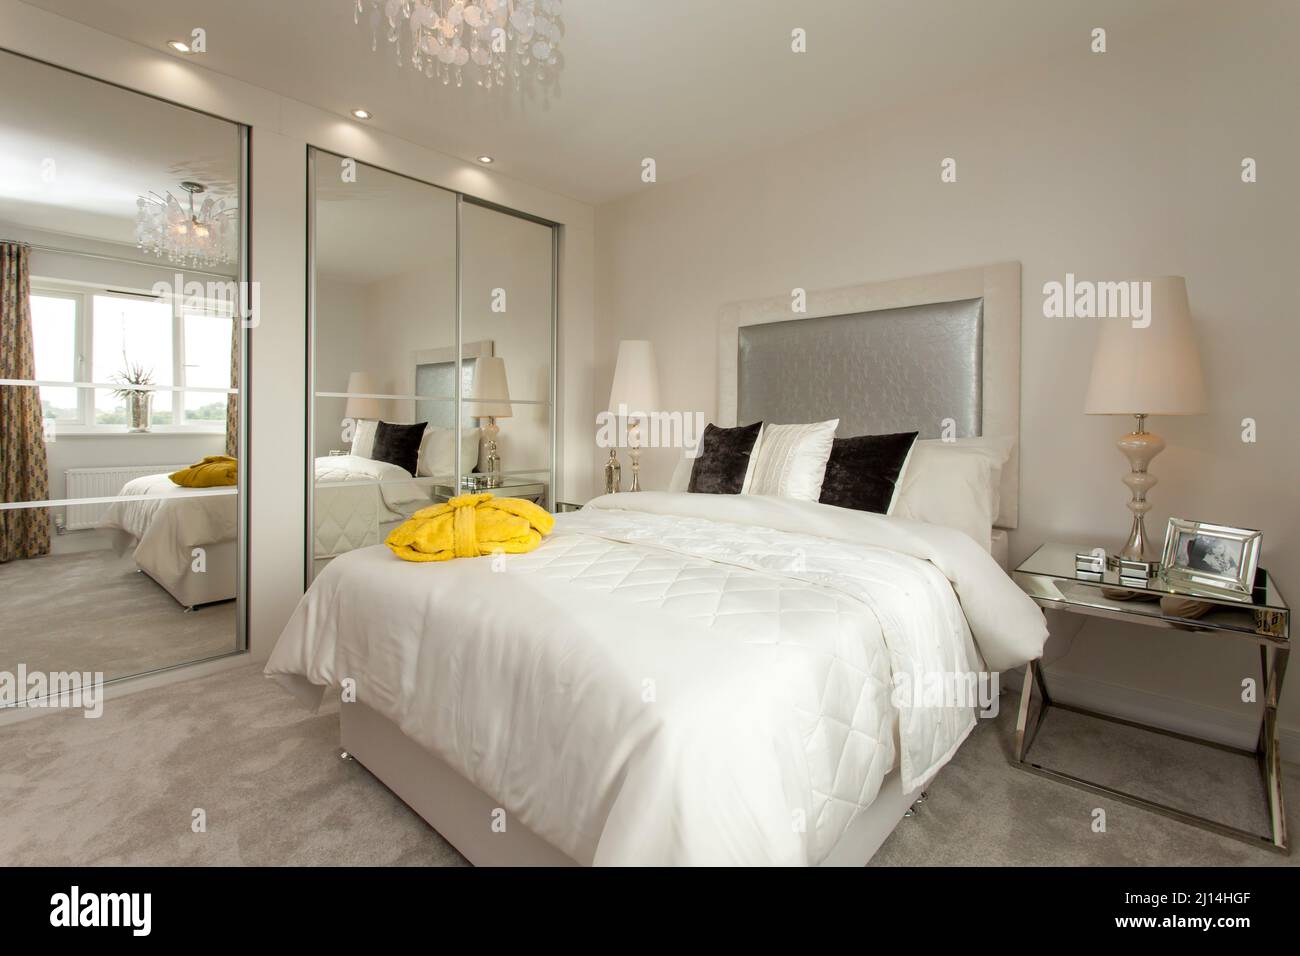 Bedroom in modern home, mirrored wardrobes,white bedspread,spacious light room, Stock Photo